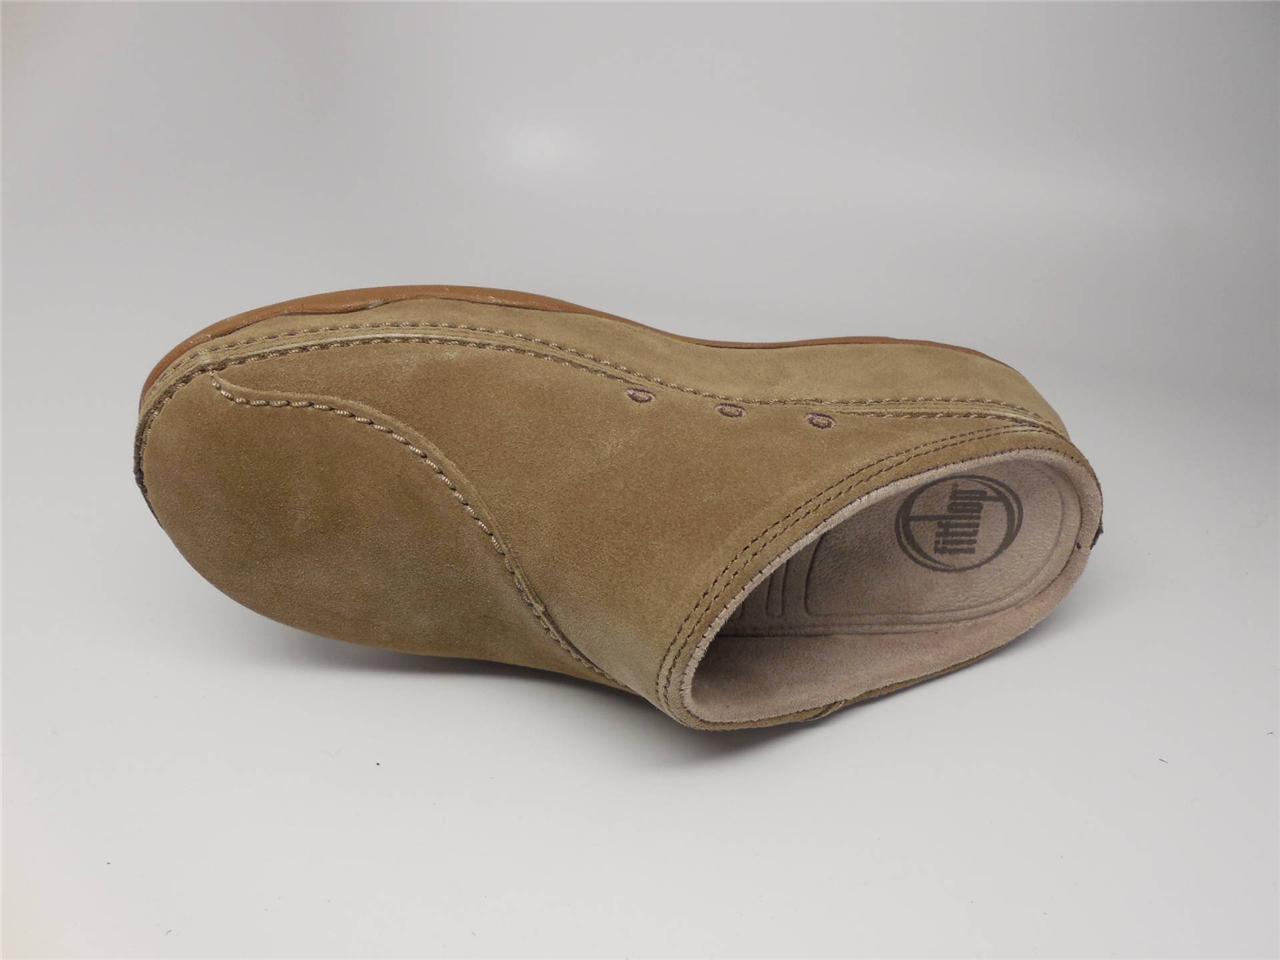 Fitflop Gogh Suede Women Suede Mules Clogs Shoes New | eBay